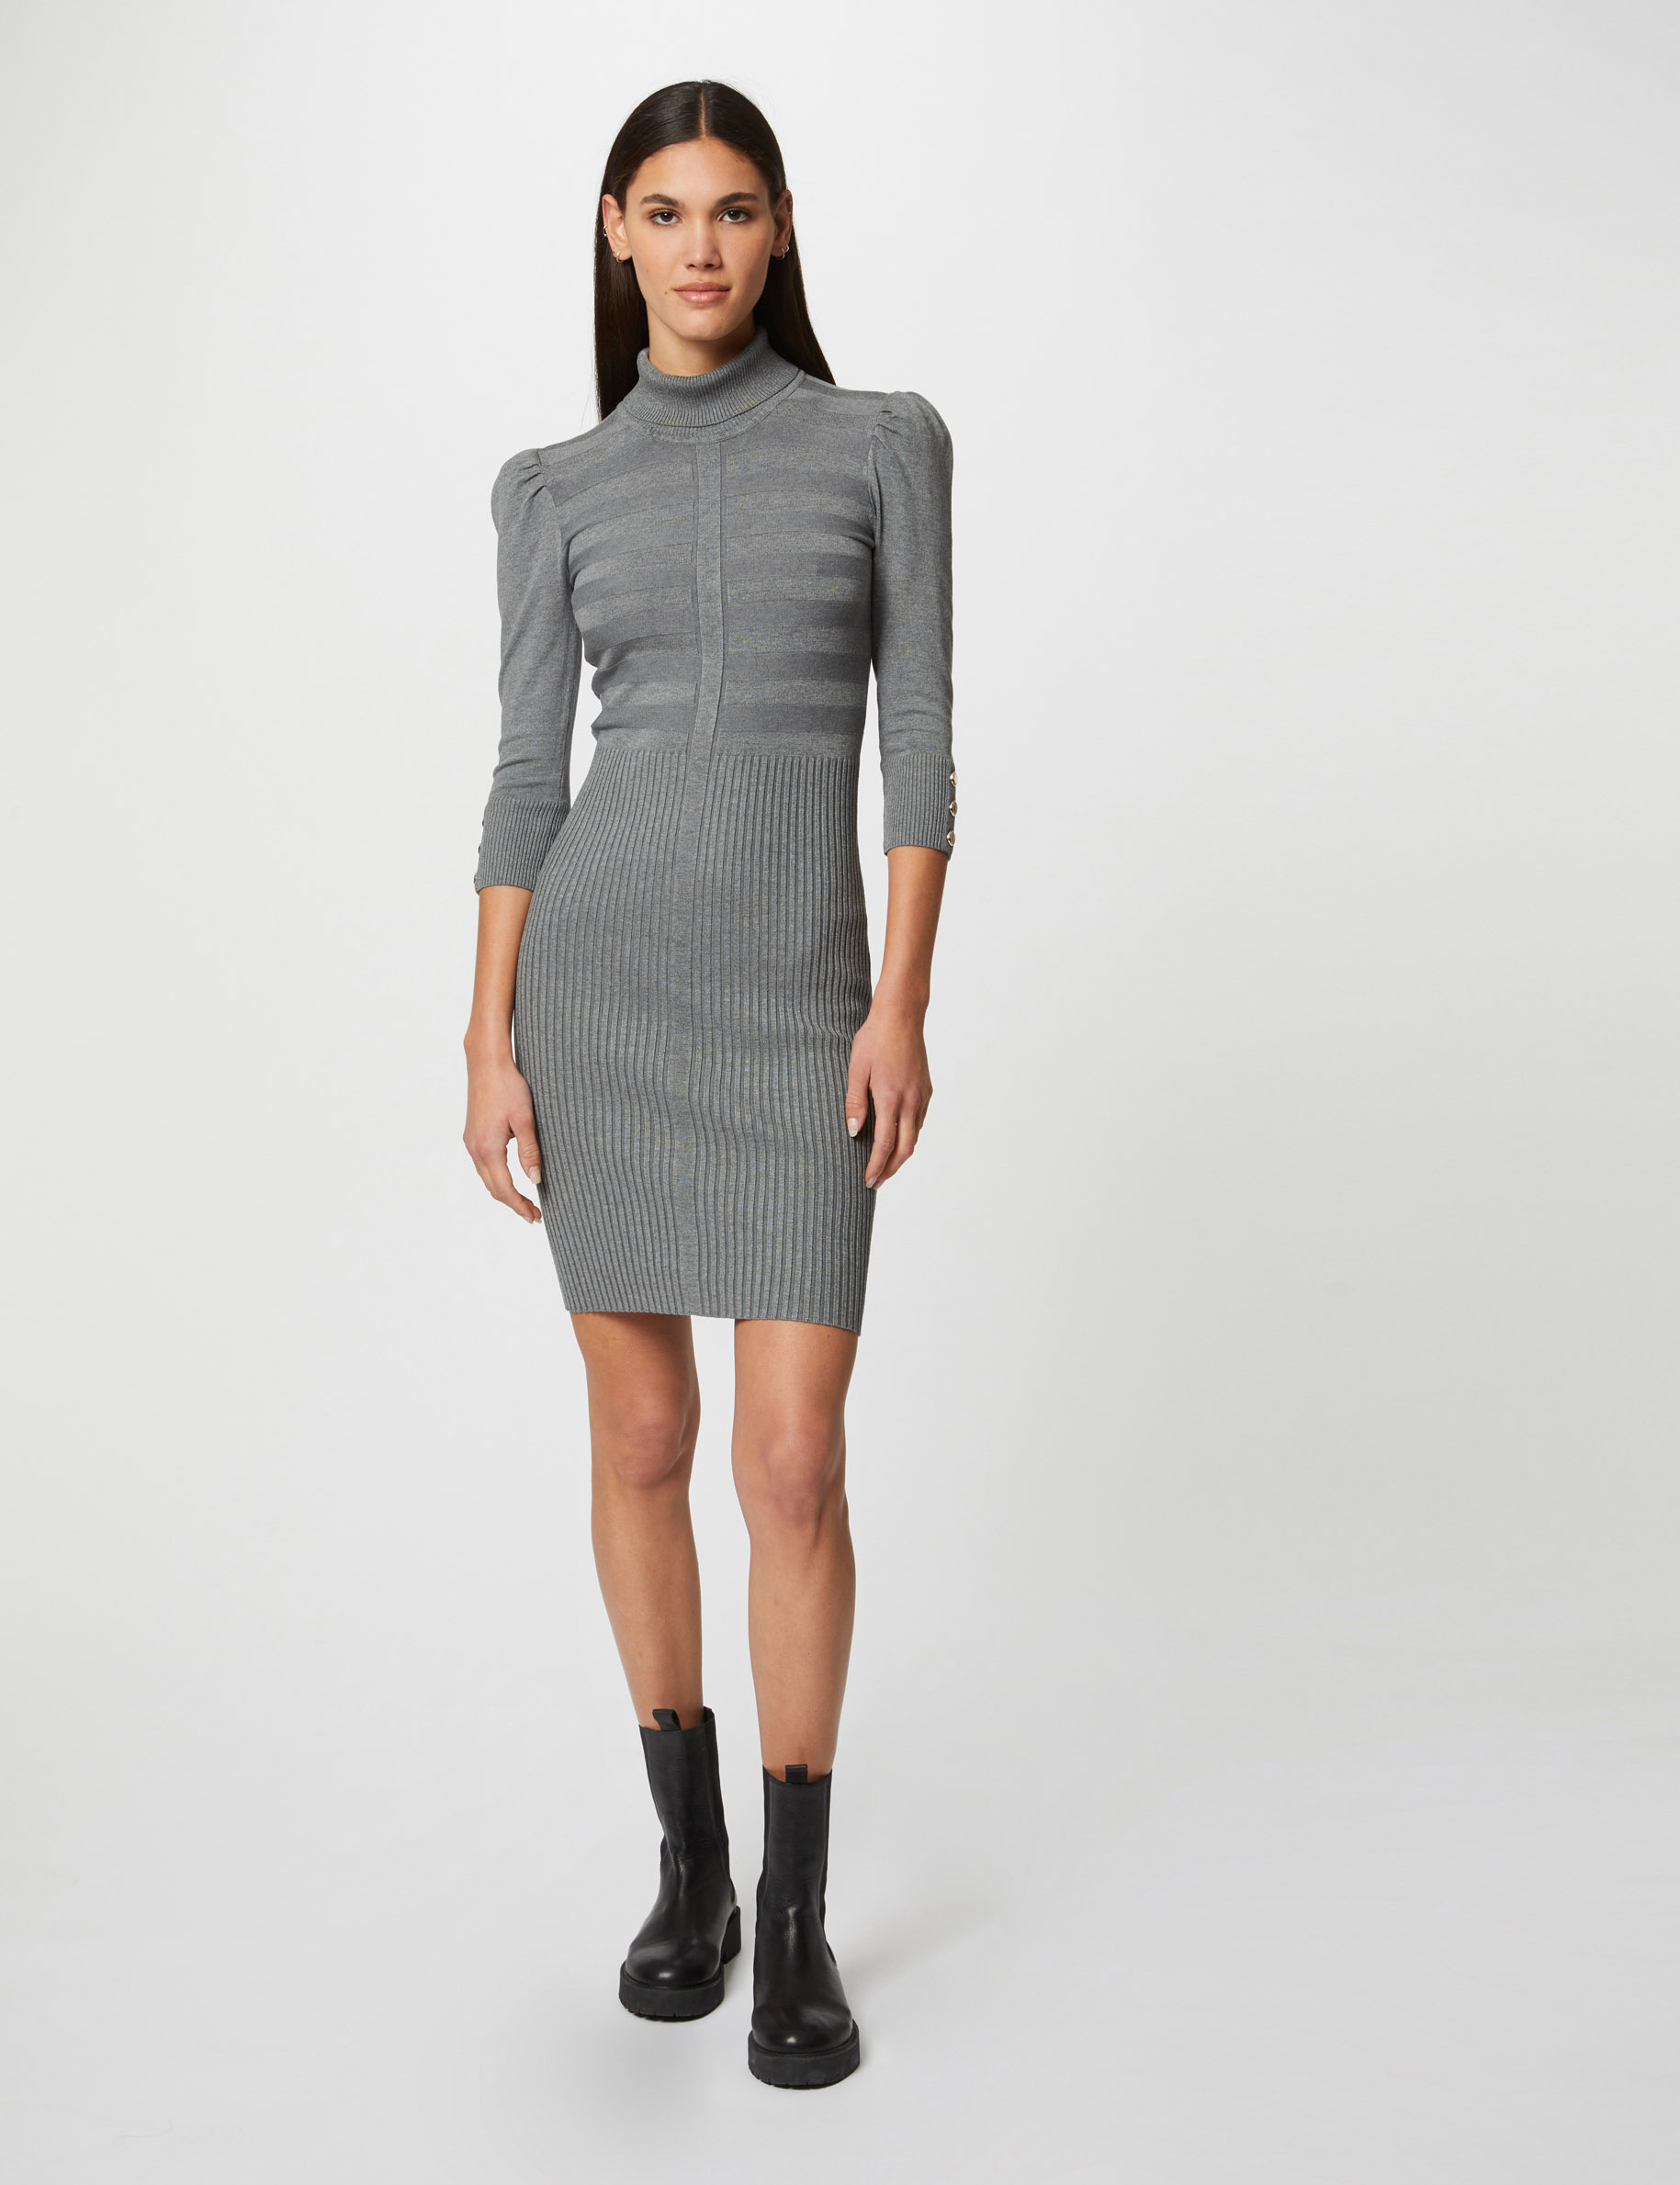 Fitted jumper dress with turtleneck anthracite grey ladies'